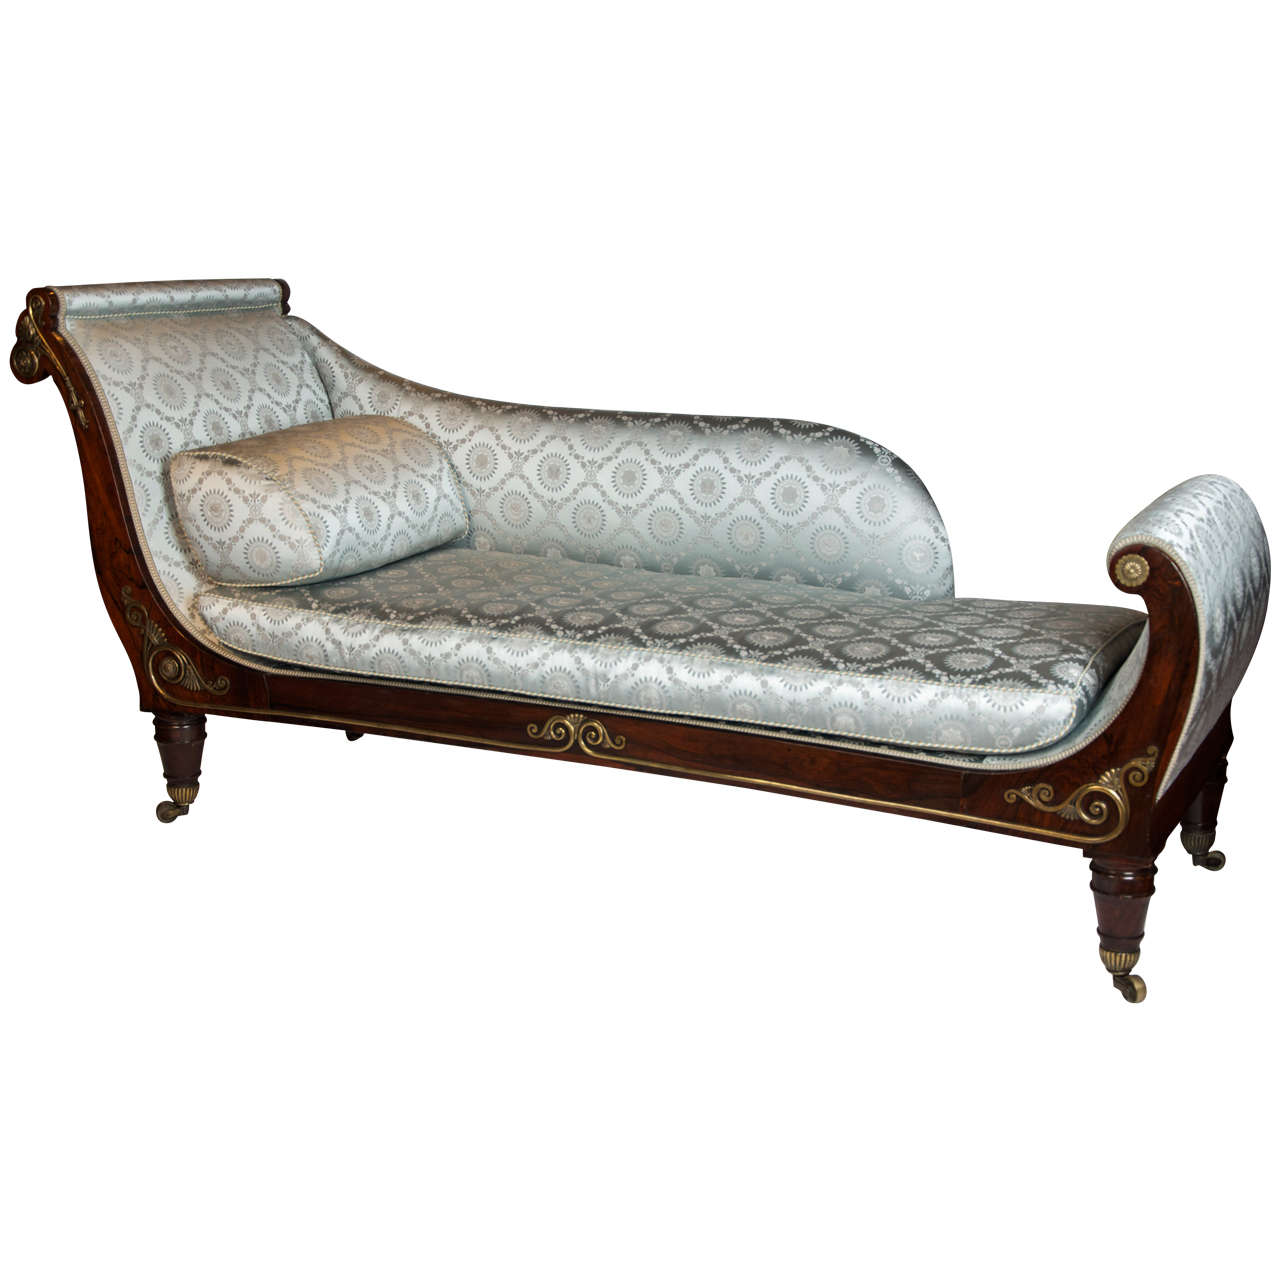 Regency Period Rosewood Chaise Lounge Blue Upholstery, style of George Smith For Sale